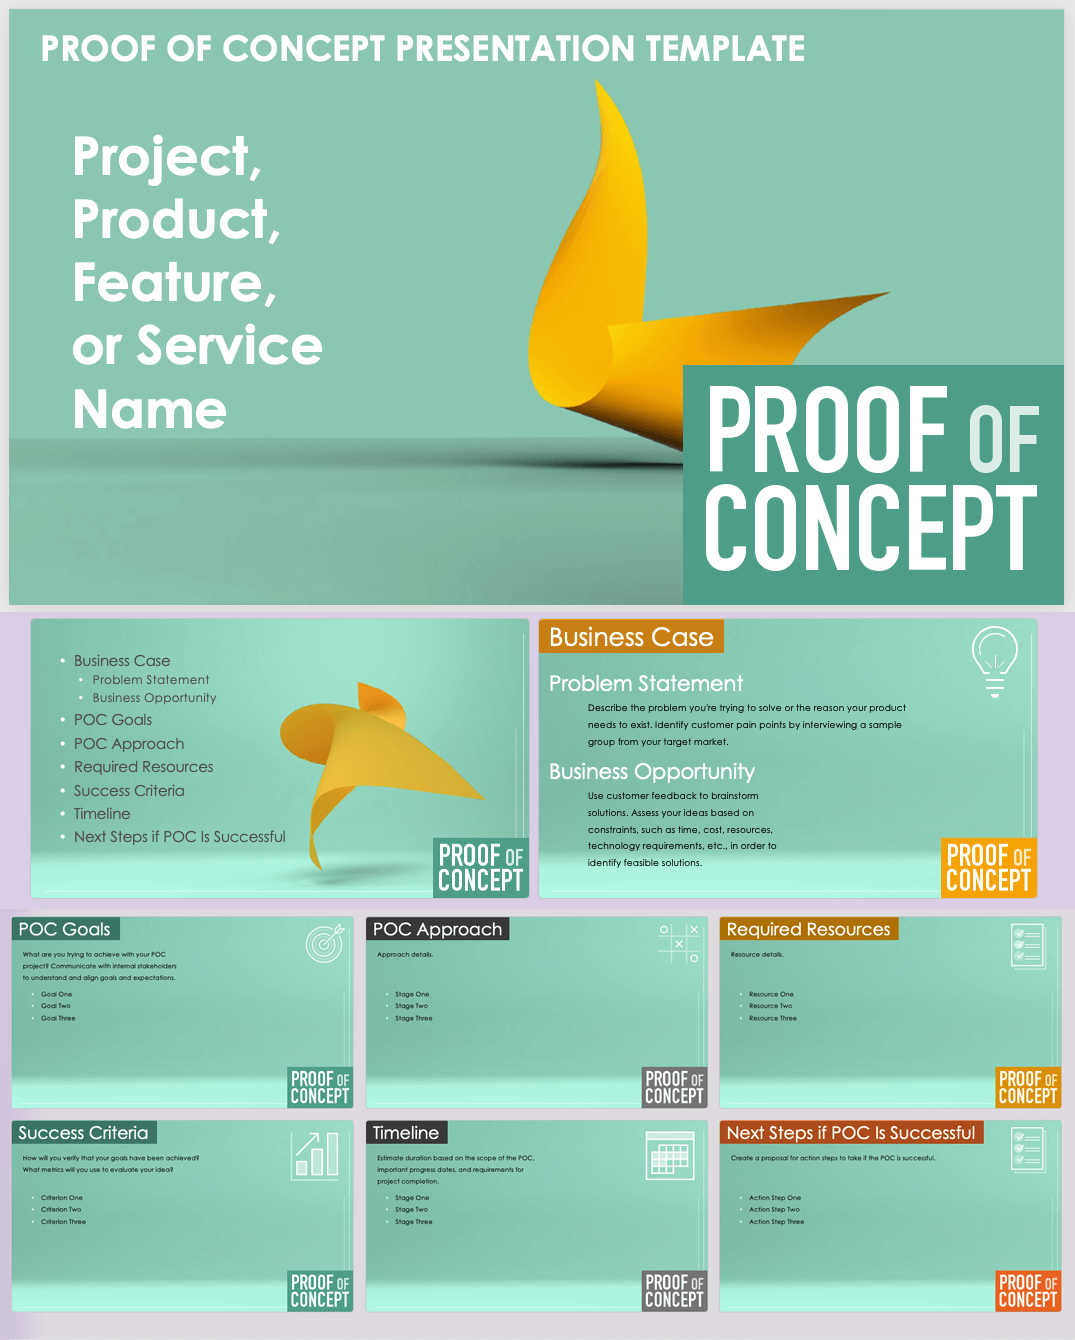 Proof-of-Concept Presentation Template